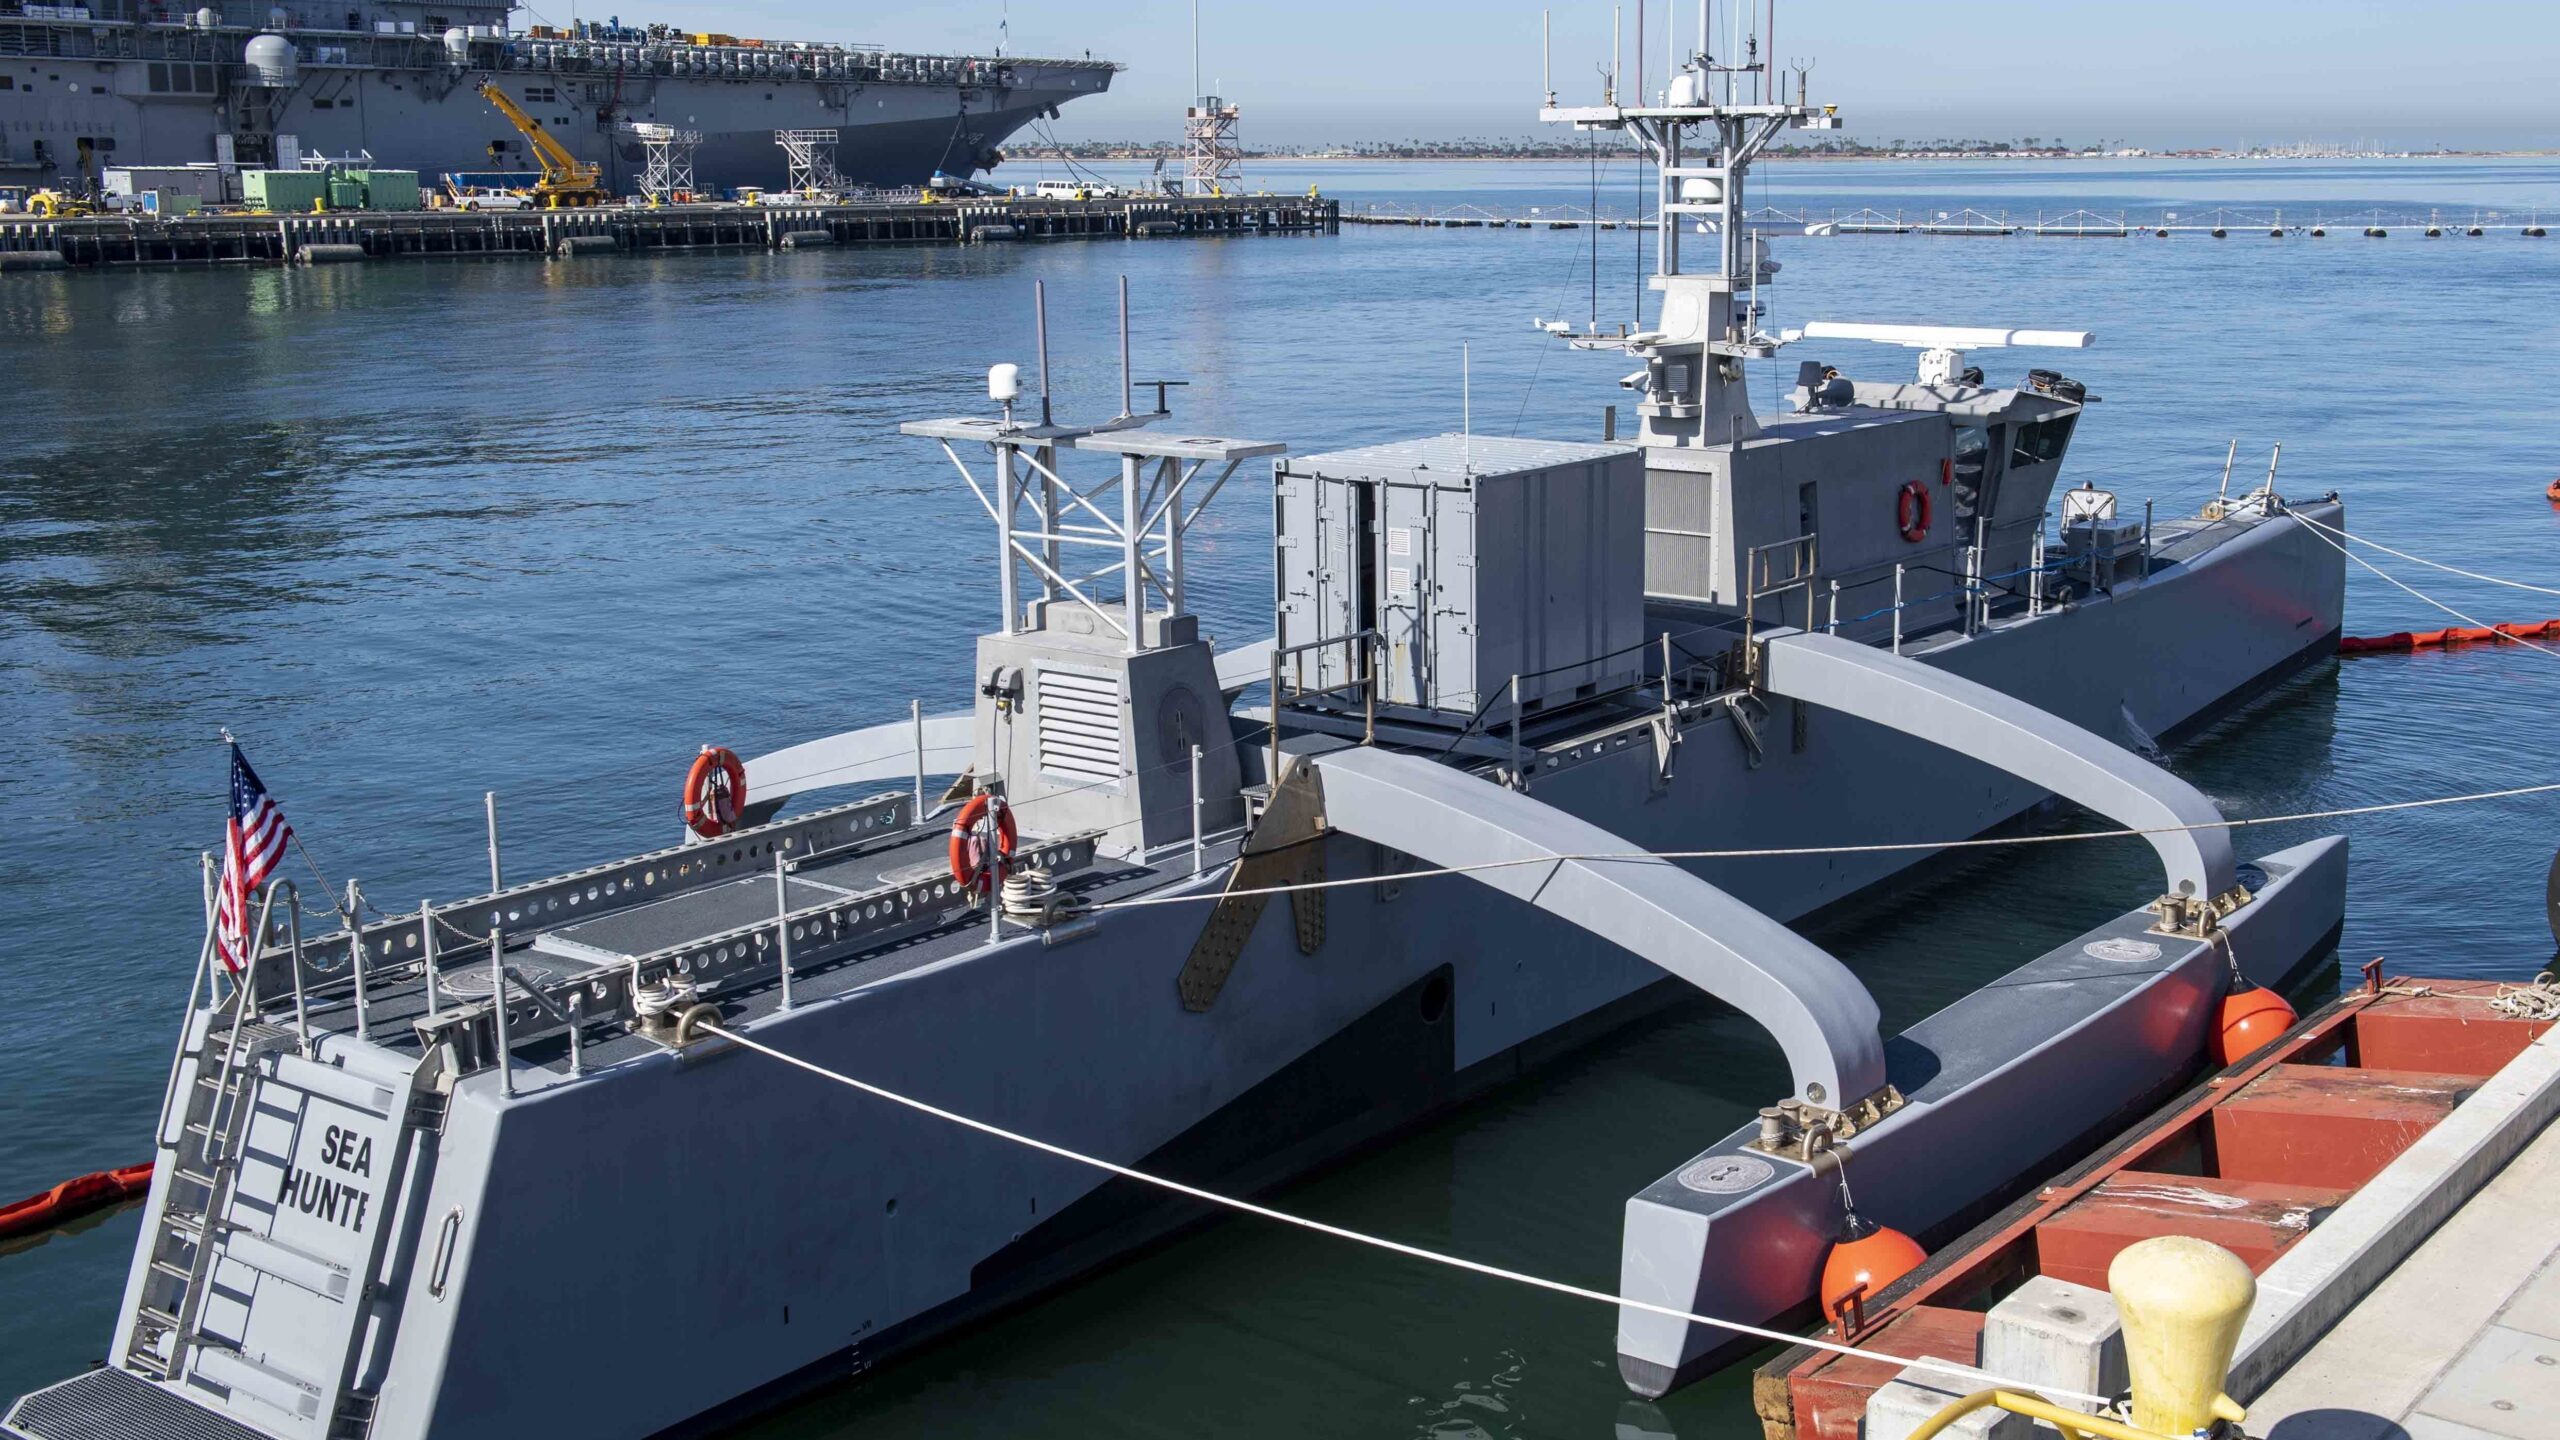 Not ‘cookie cutter’: Navy’s unmanned tech should answer threats, advisors say